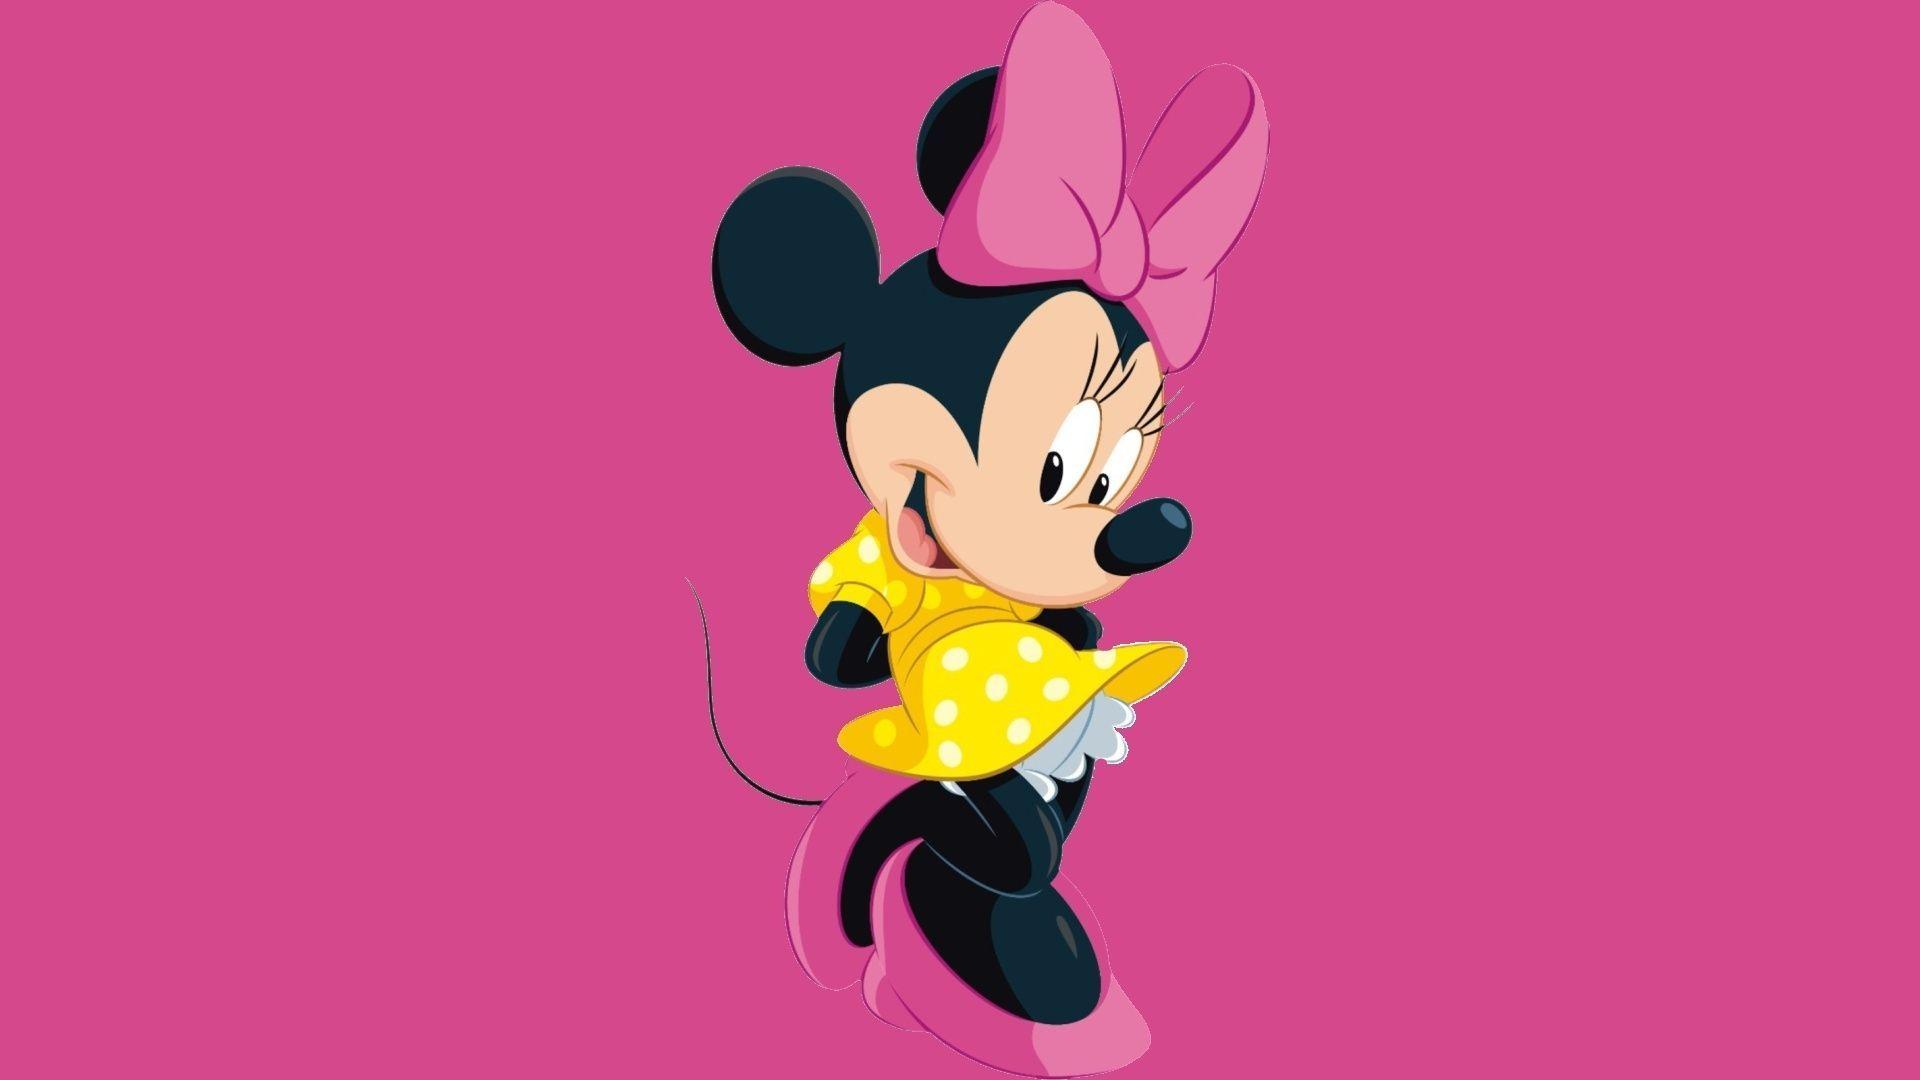 Minnie Mouse Wallpaper Collection For Free Download. HD Wallpaper